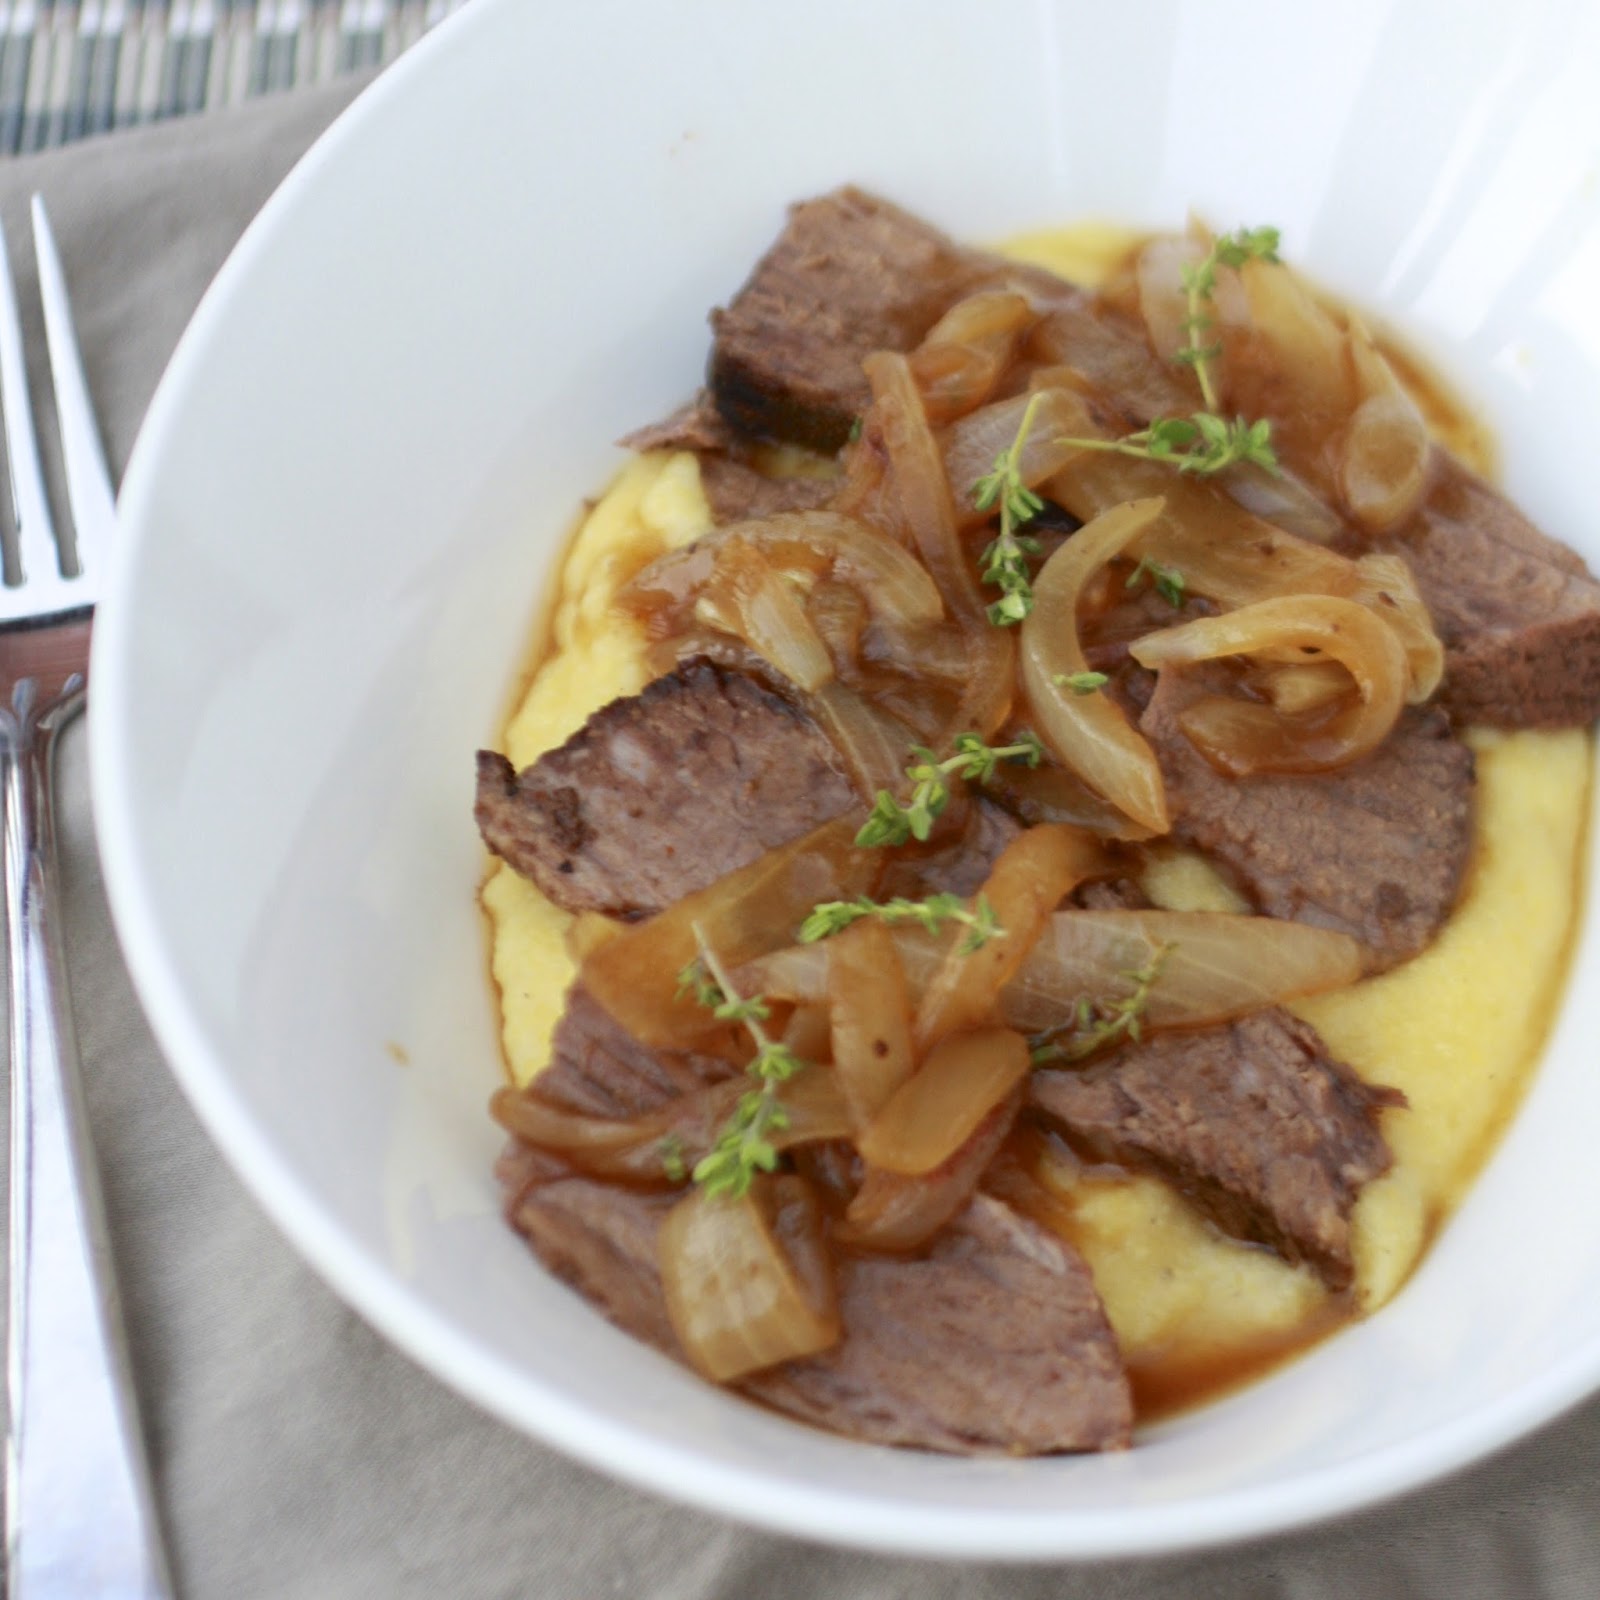 Beer Braised Brisket over Polenta with Onion Jam | The Sweets Life